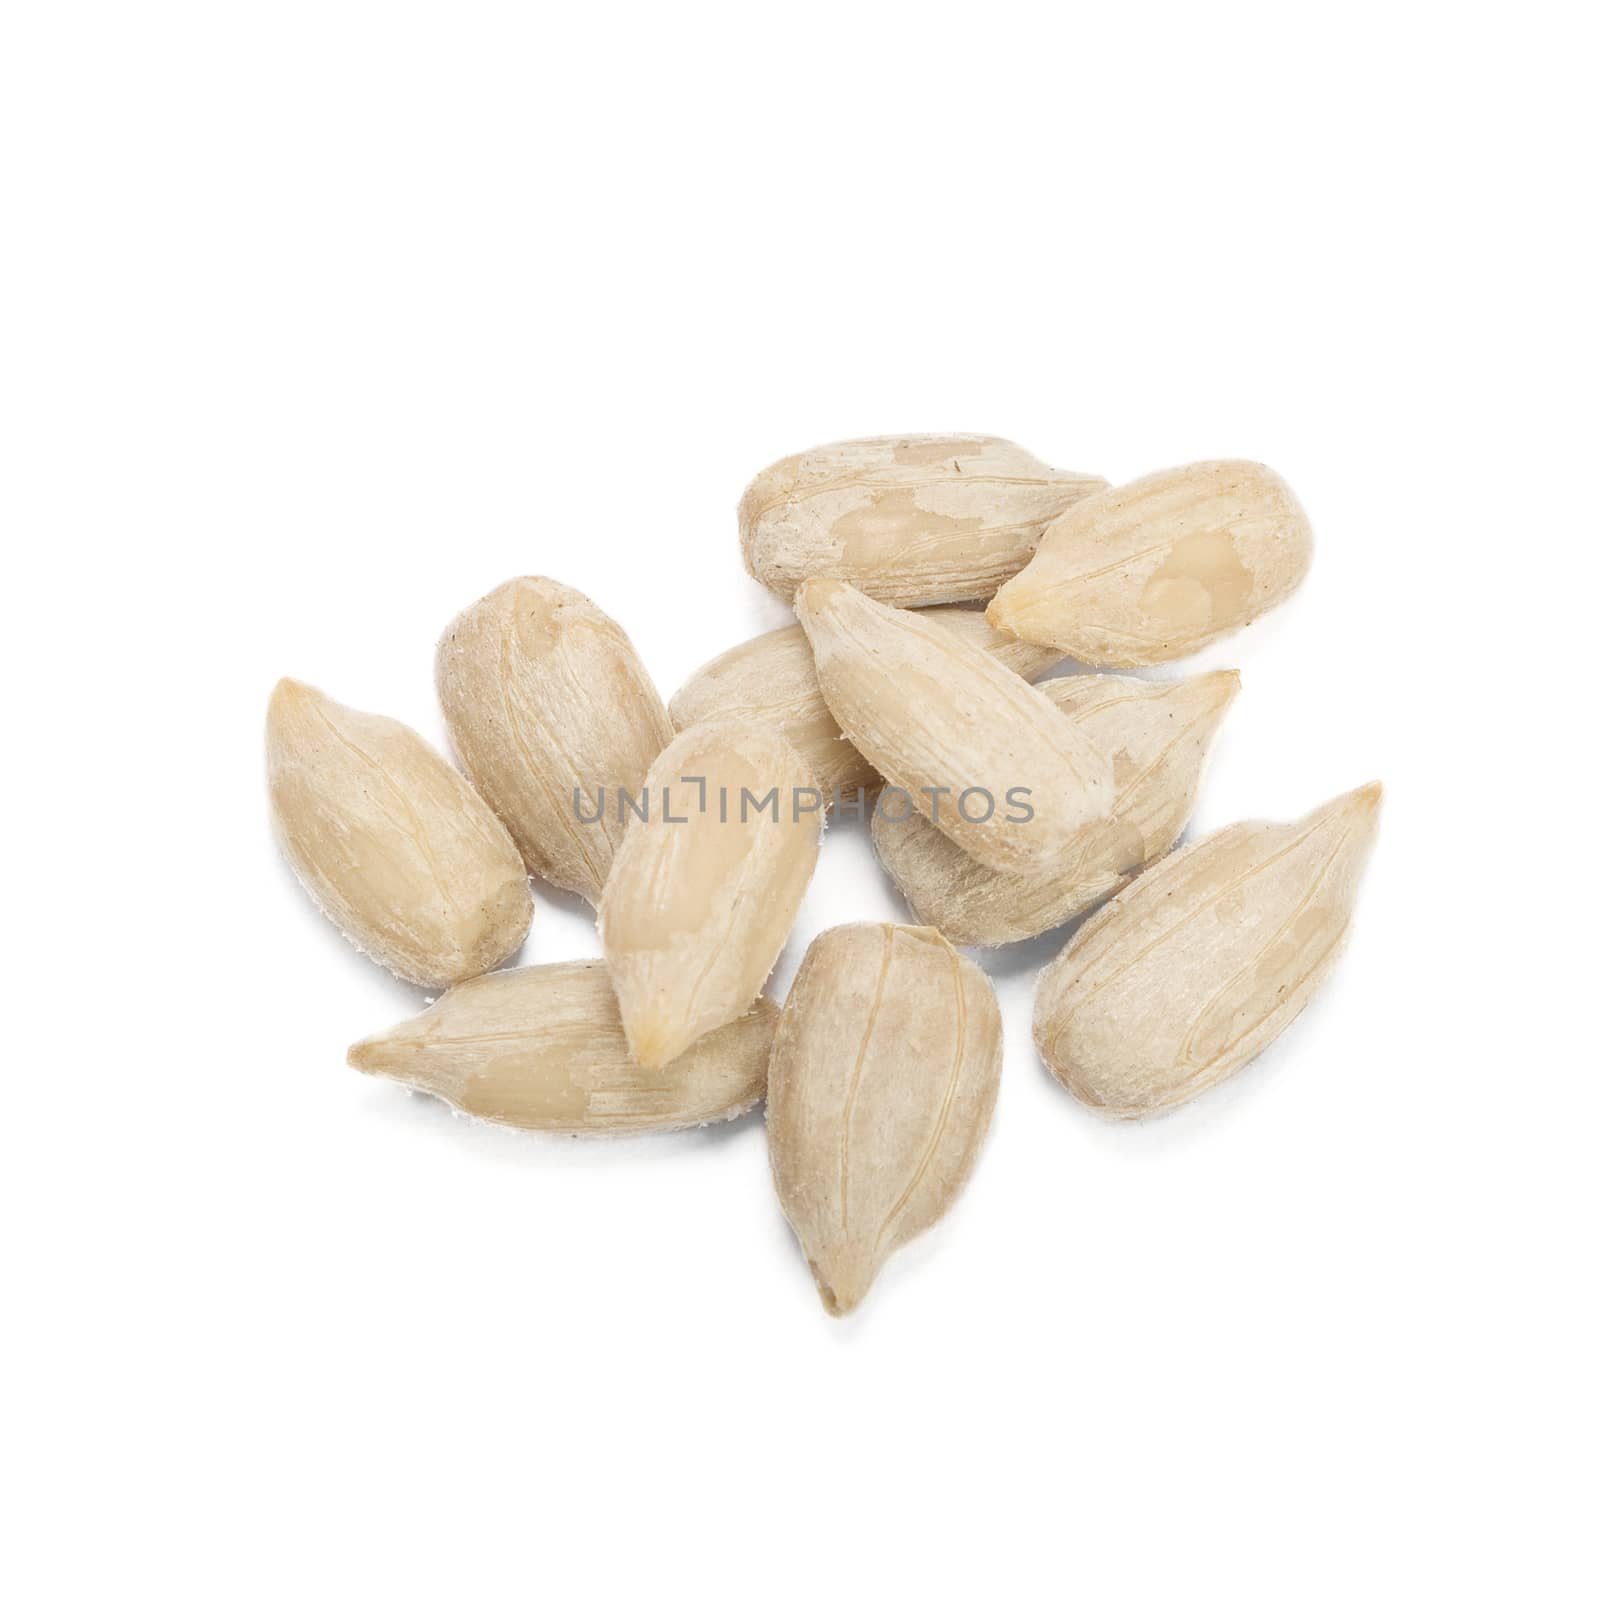 Pile of sunflower seeds isolated on white background by ivo_13